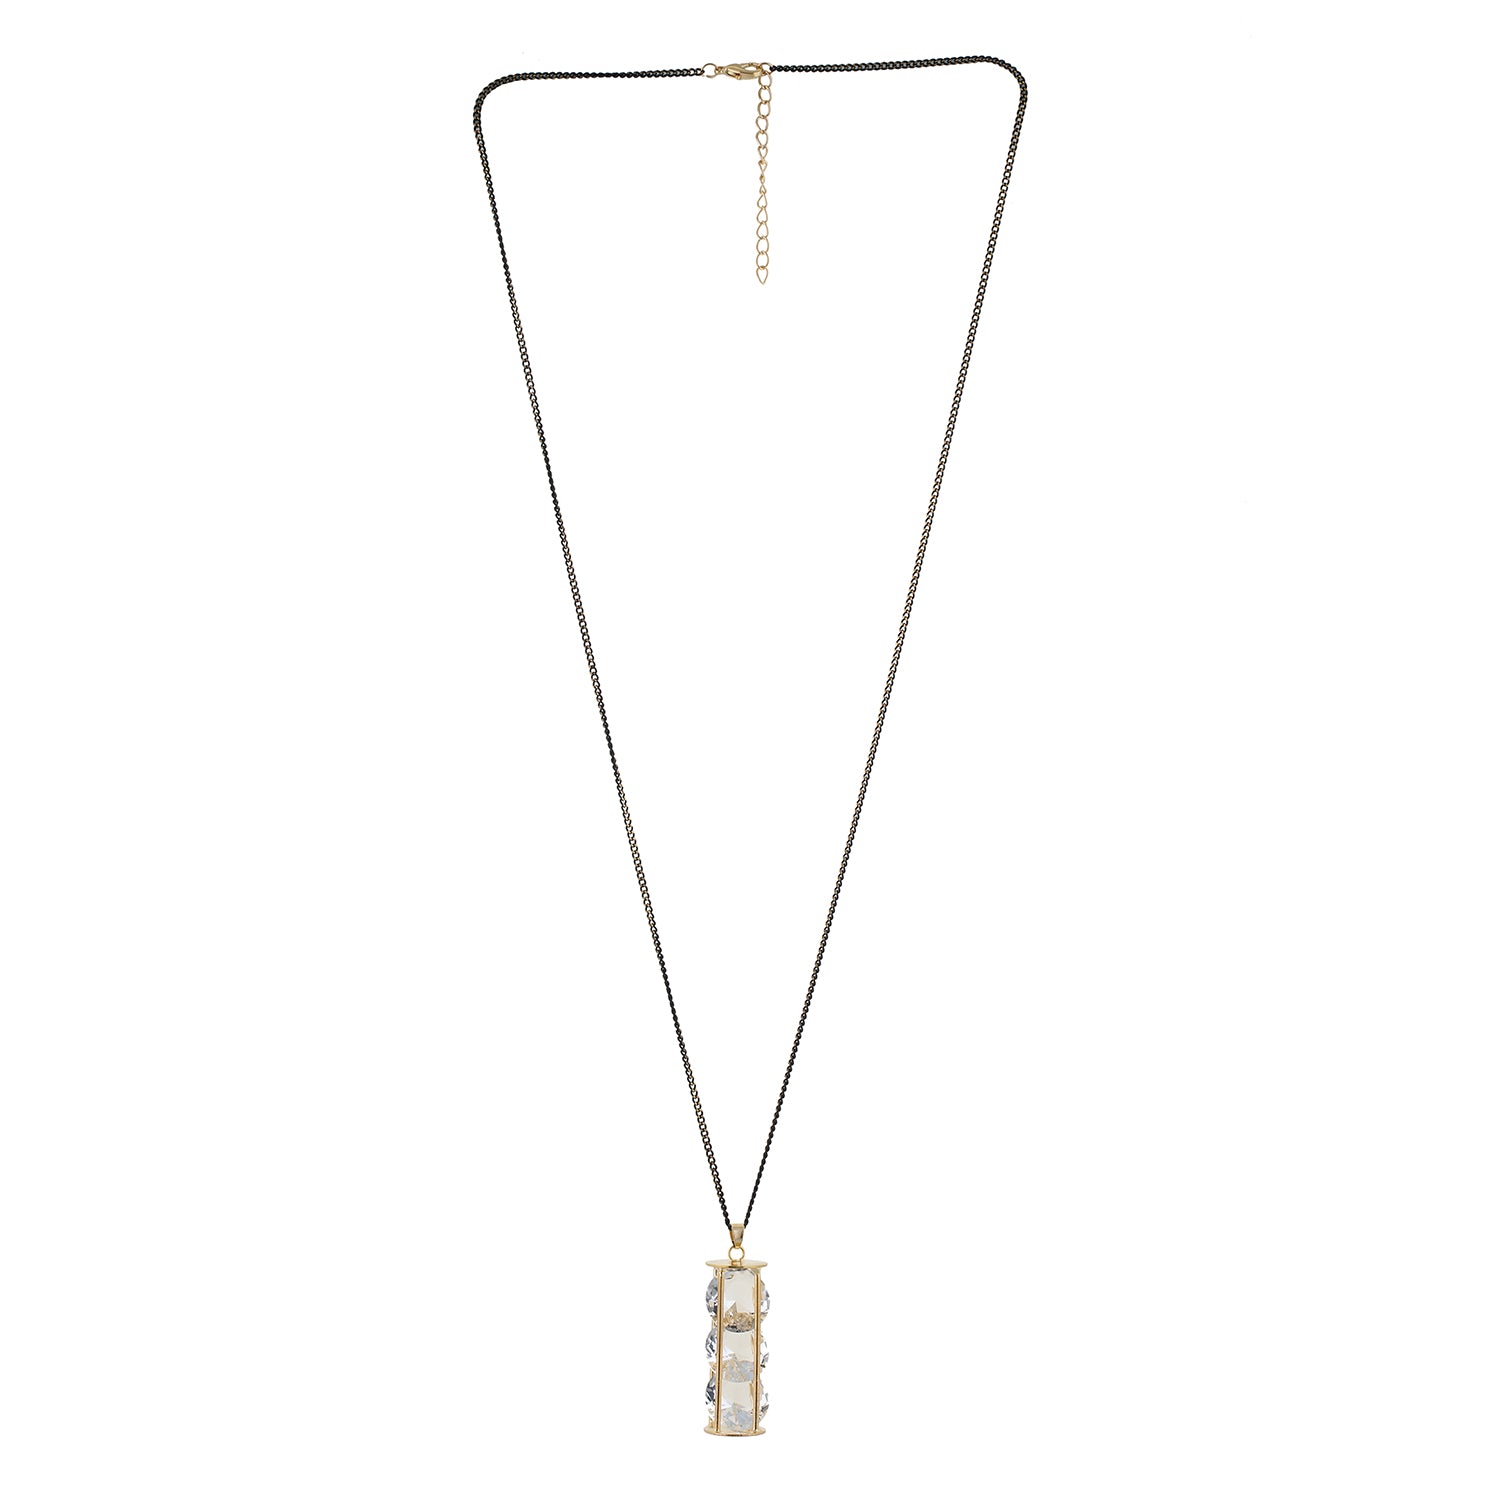 Gold and Grey colour Cylindrical design Pendant with Chain for girls and women